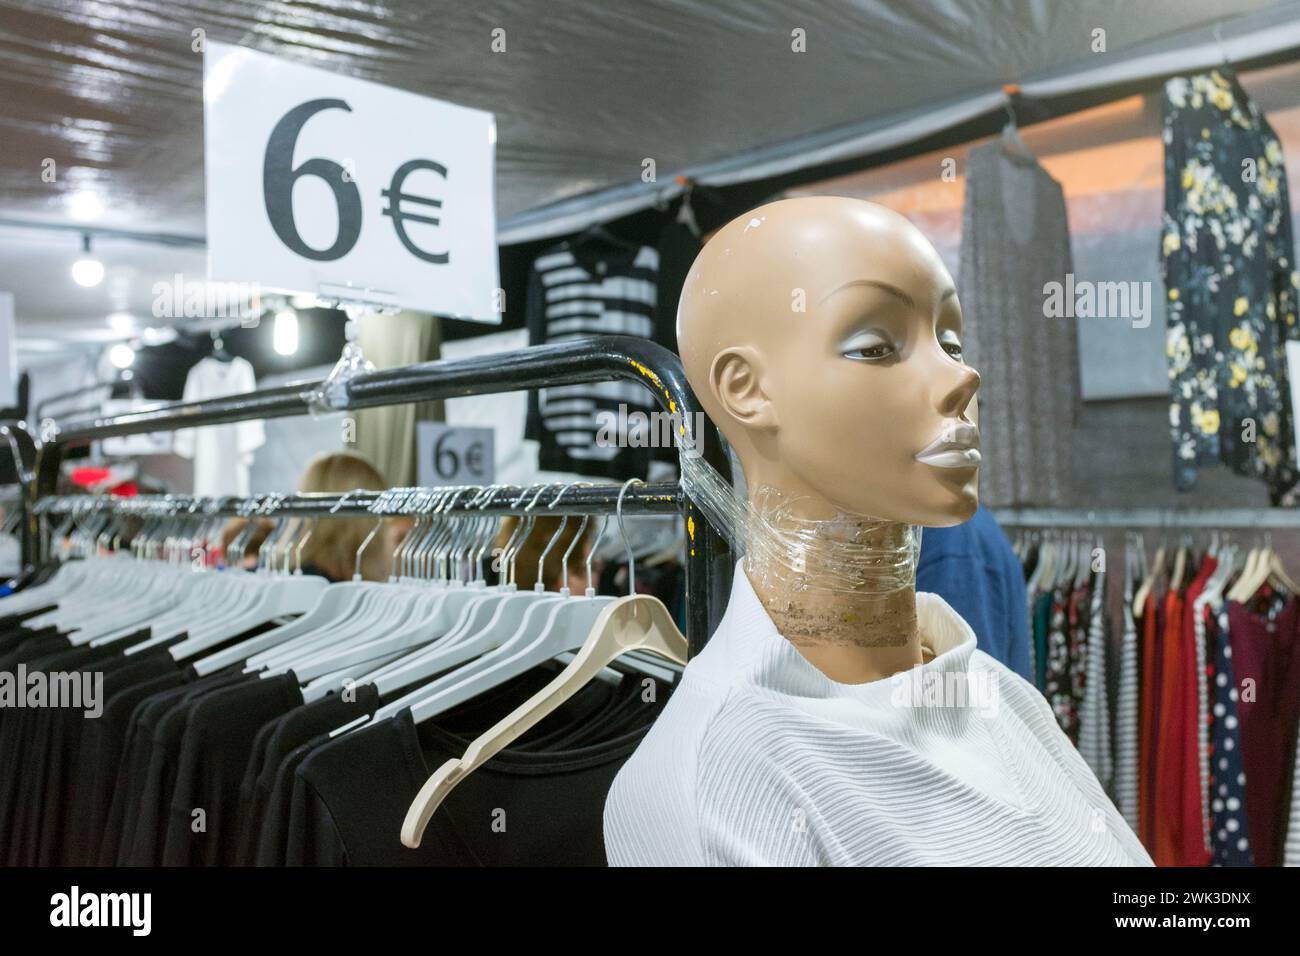 An unconventional fixing of a mannequin at a market in Northern Greece. Stock Photo